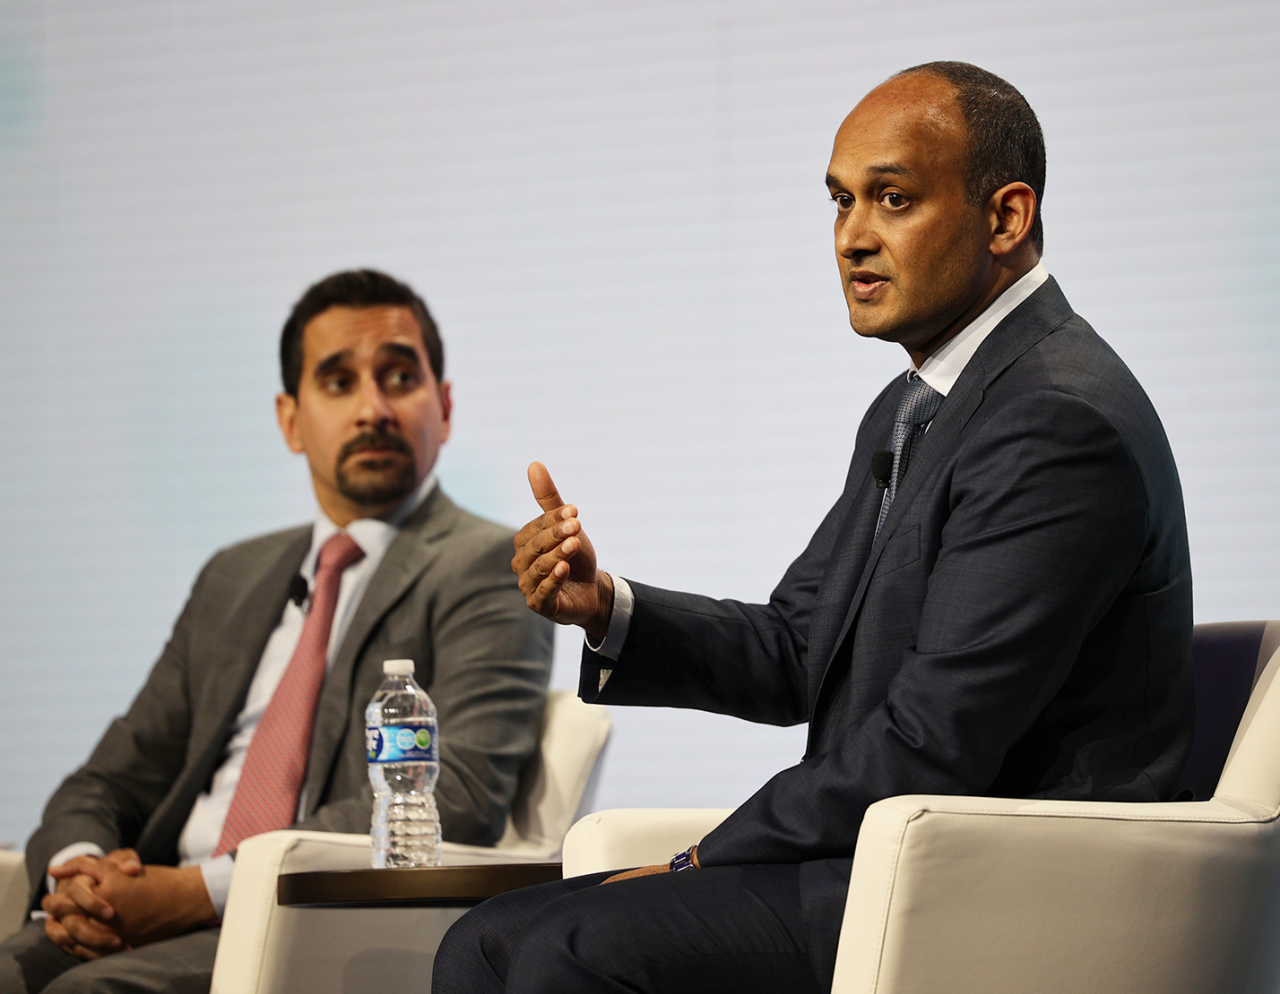 From left: Niyam Gandhi, Chief Financial Officer and Treasurer at Mass General Brigham, and Sree Chaguturu, M.D., Executive Vice President and Chief Medical Officer of CVS Health